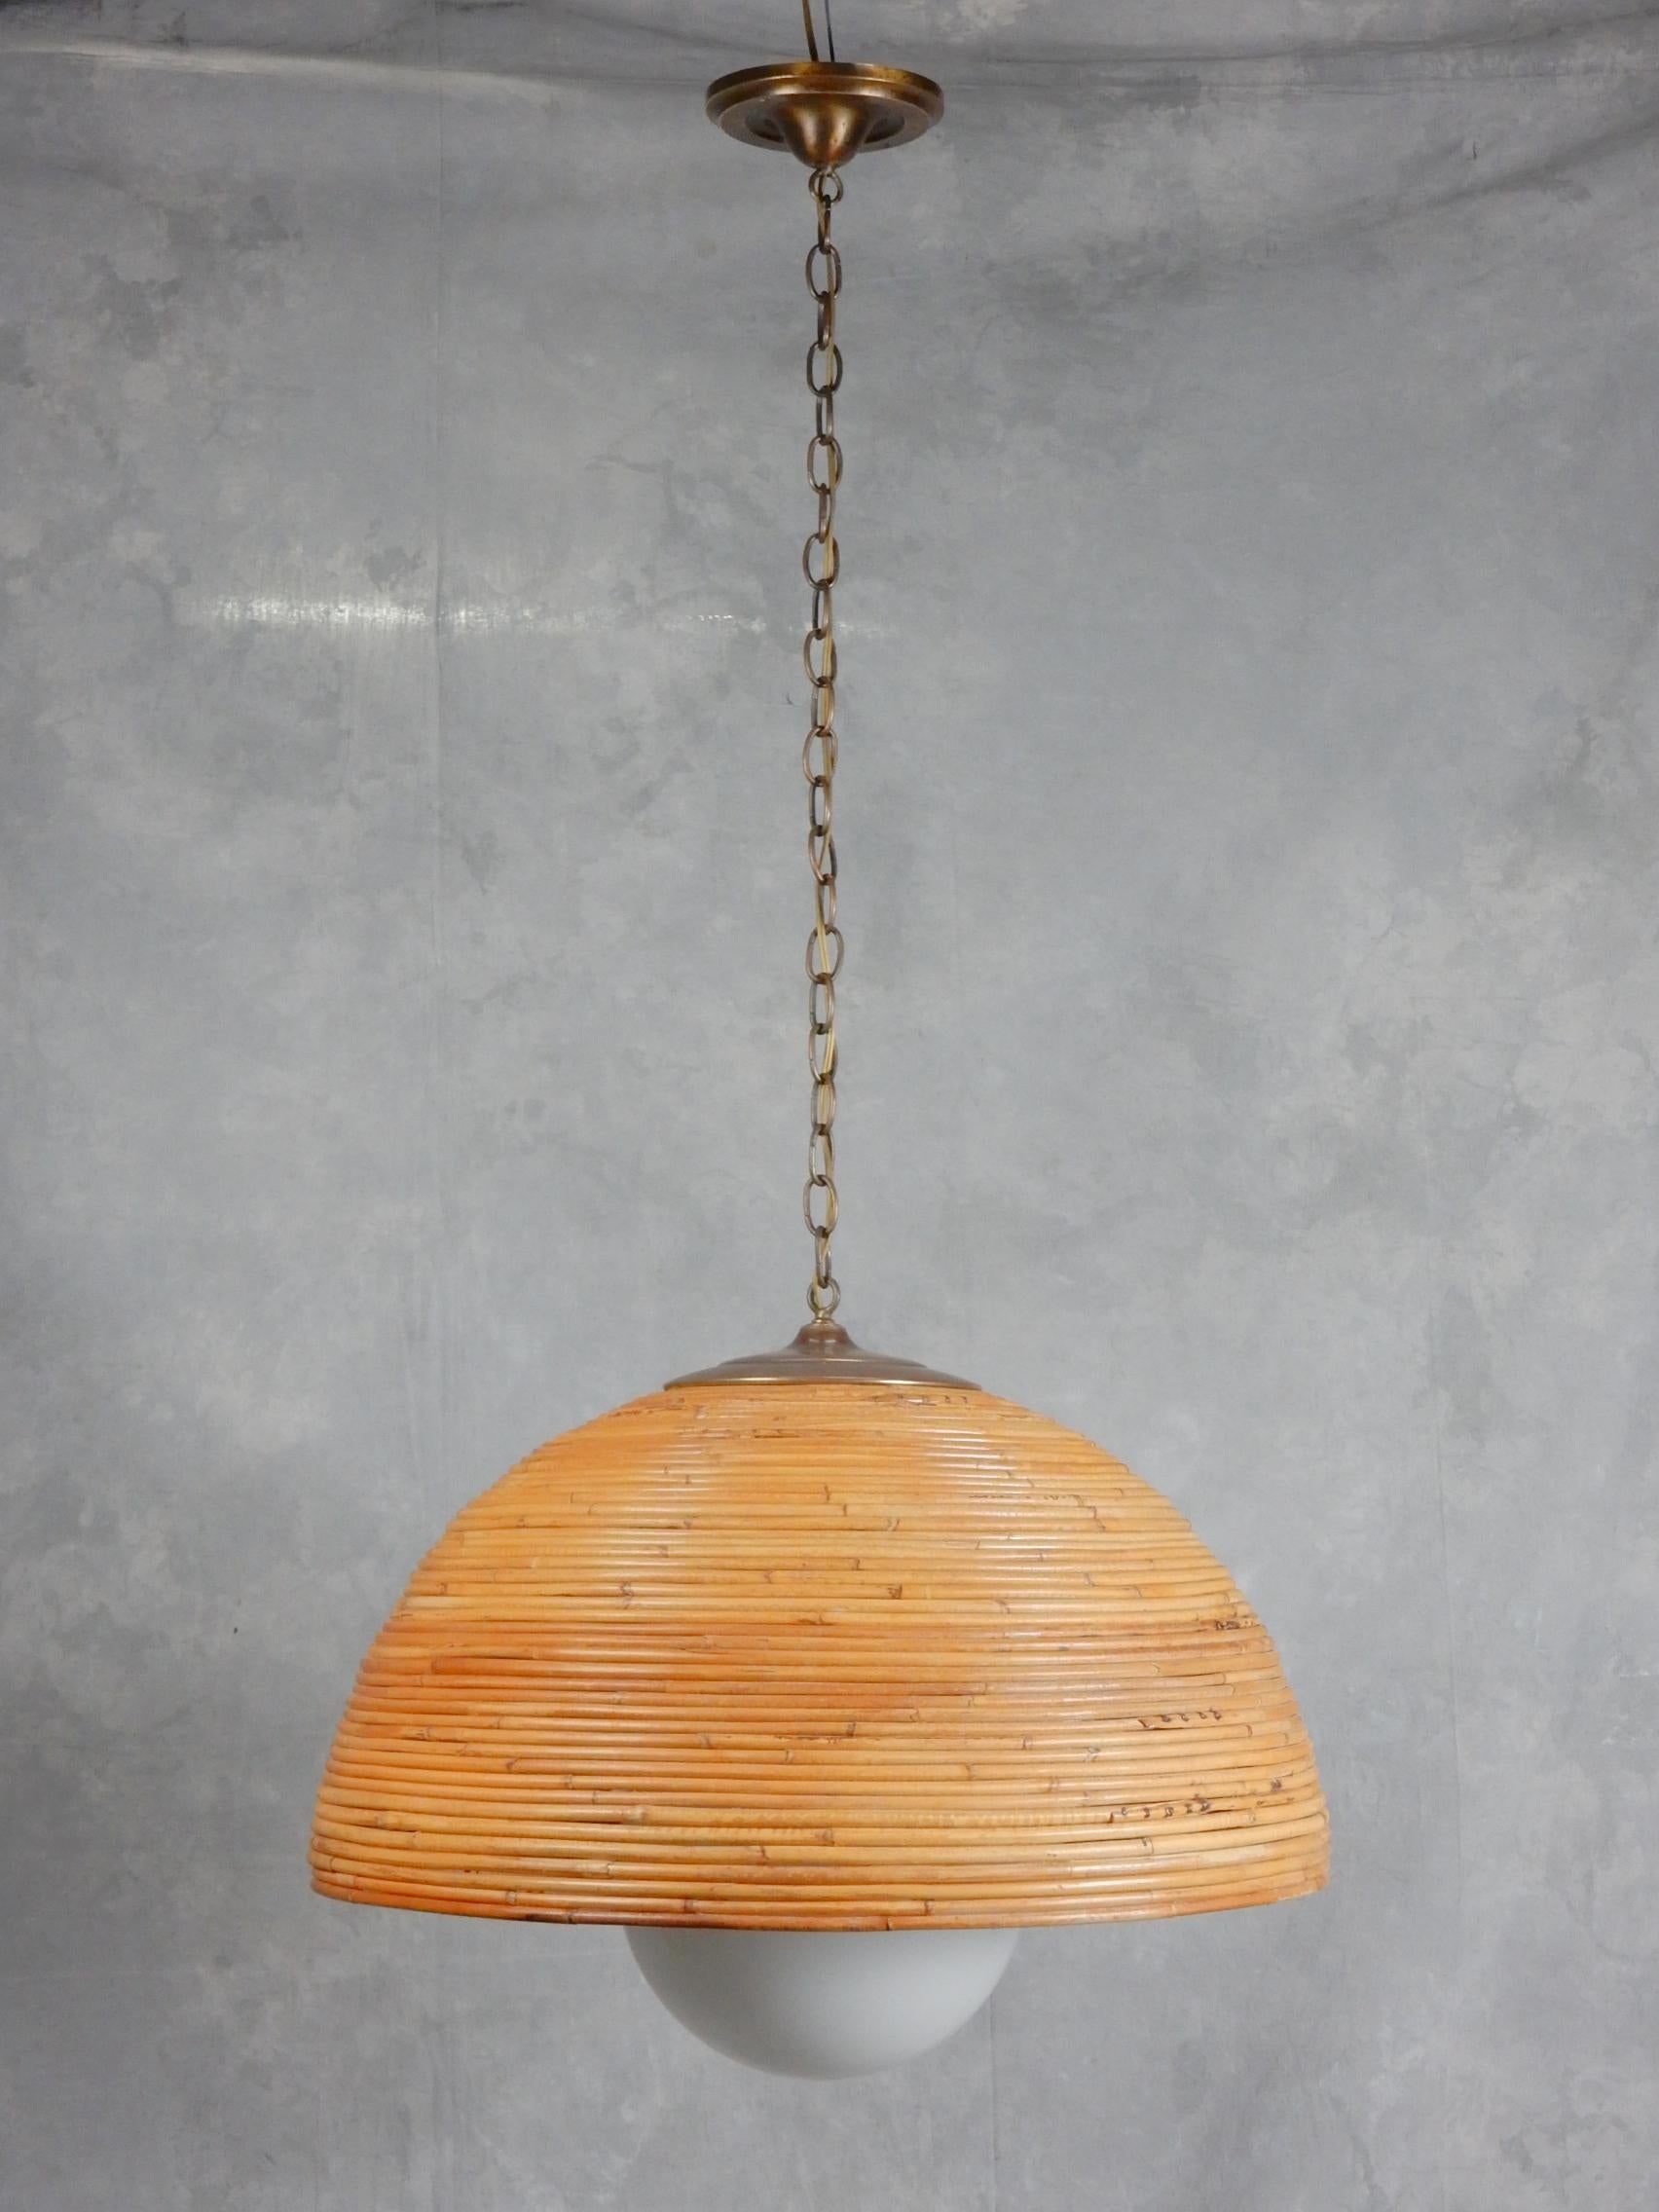 Huge 1960's Rattan Bamboo & Brass Dome Pendant Chandelier  In Good Condition For Sale In Las Vegas, NV